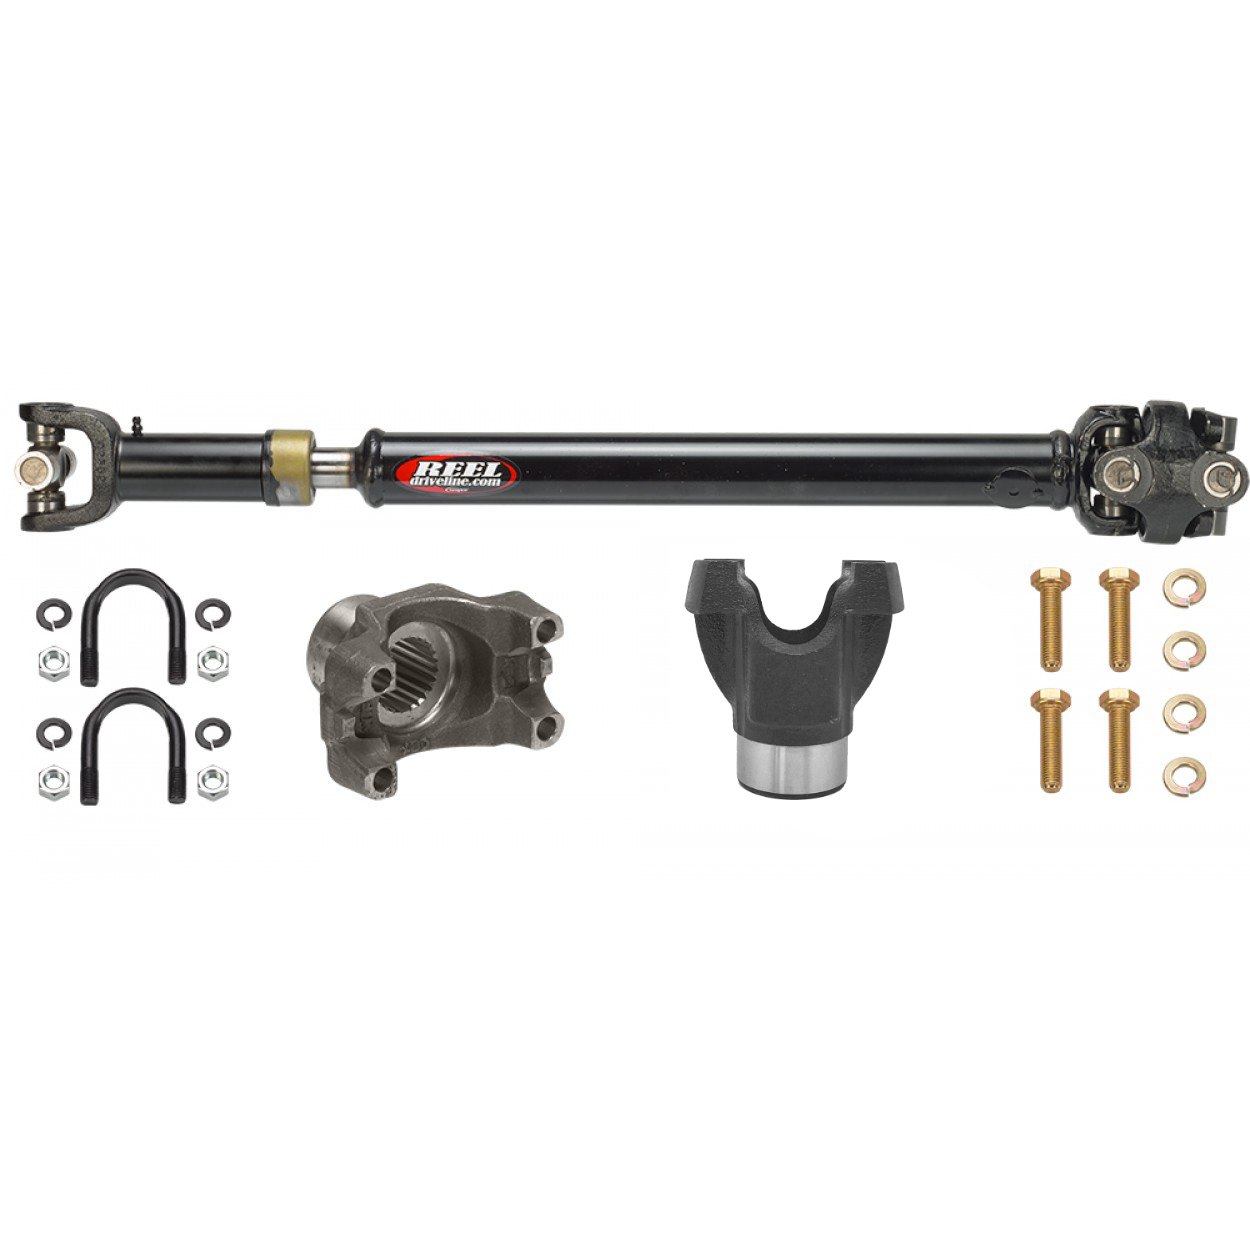 jeep-wrangler-jl-sport-20l-turbo-1310-heavy-duty-front-driveshaft-with-double-cardan-joint